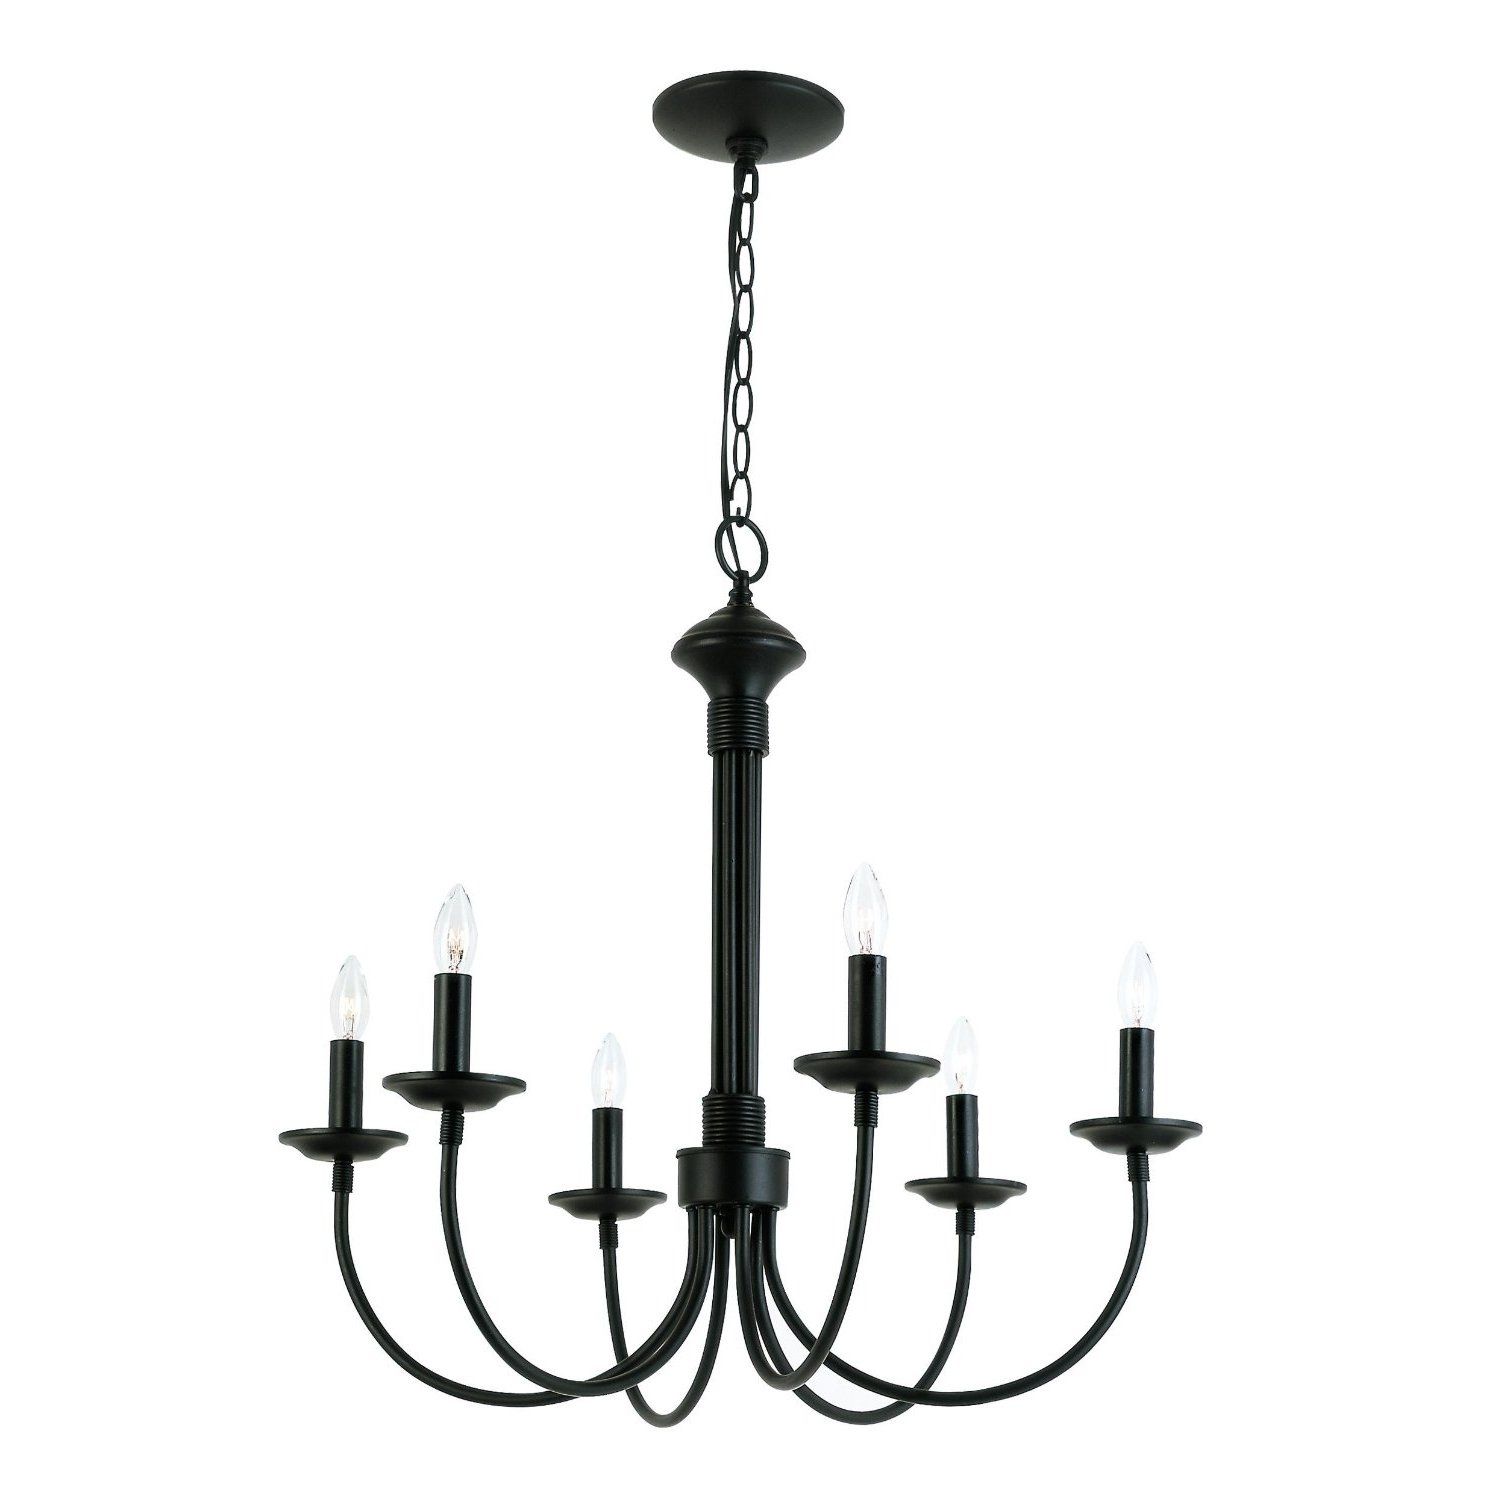 Charlton Home Blue Heron 6 Light Candle Style Chandelier Reviews Intended For Candle Light Chandelier (View 3 of 12)